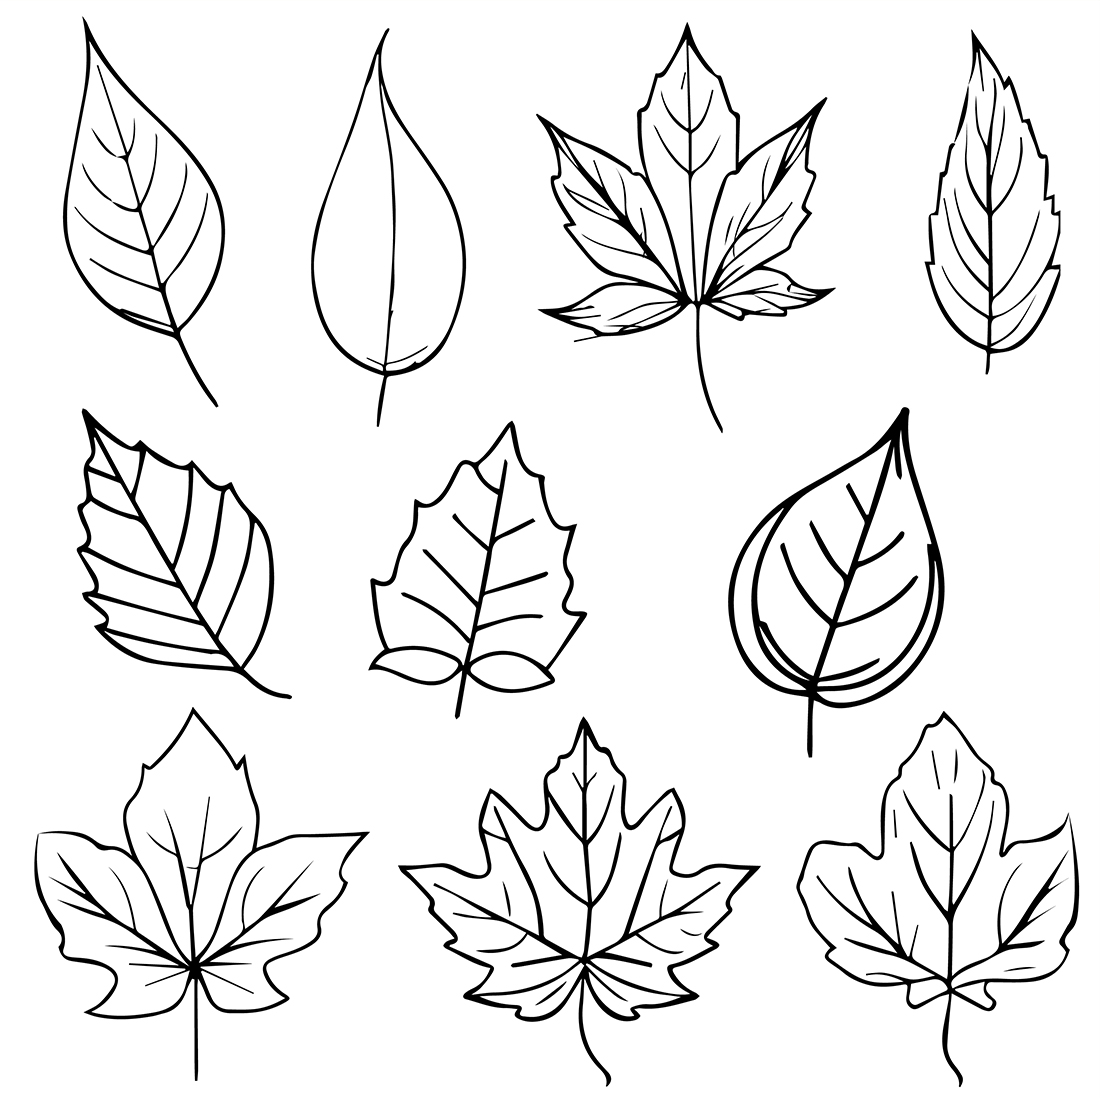 Set of autumn leaf coloring sheets, autumn falling leaf line drawings, hand drawing leaves line art, preview image.